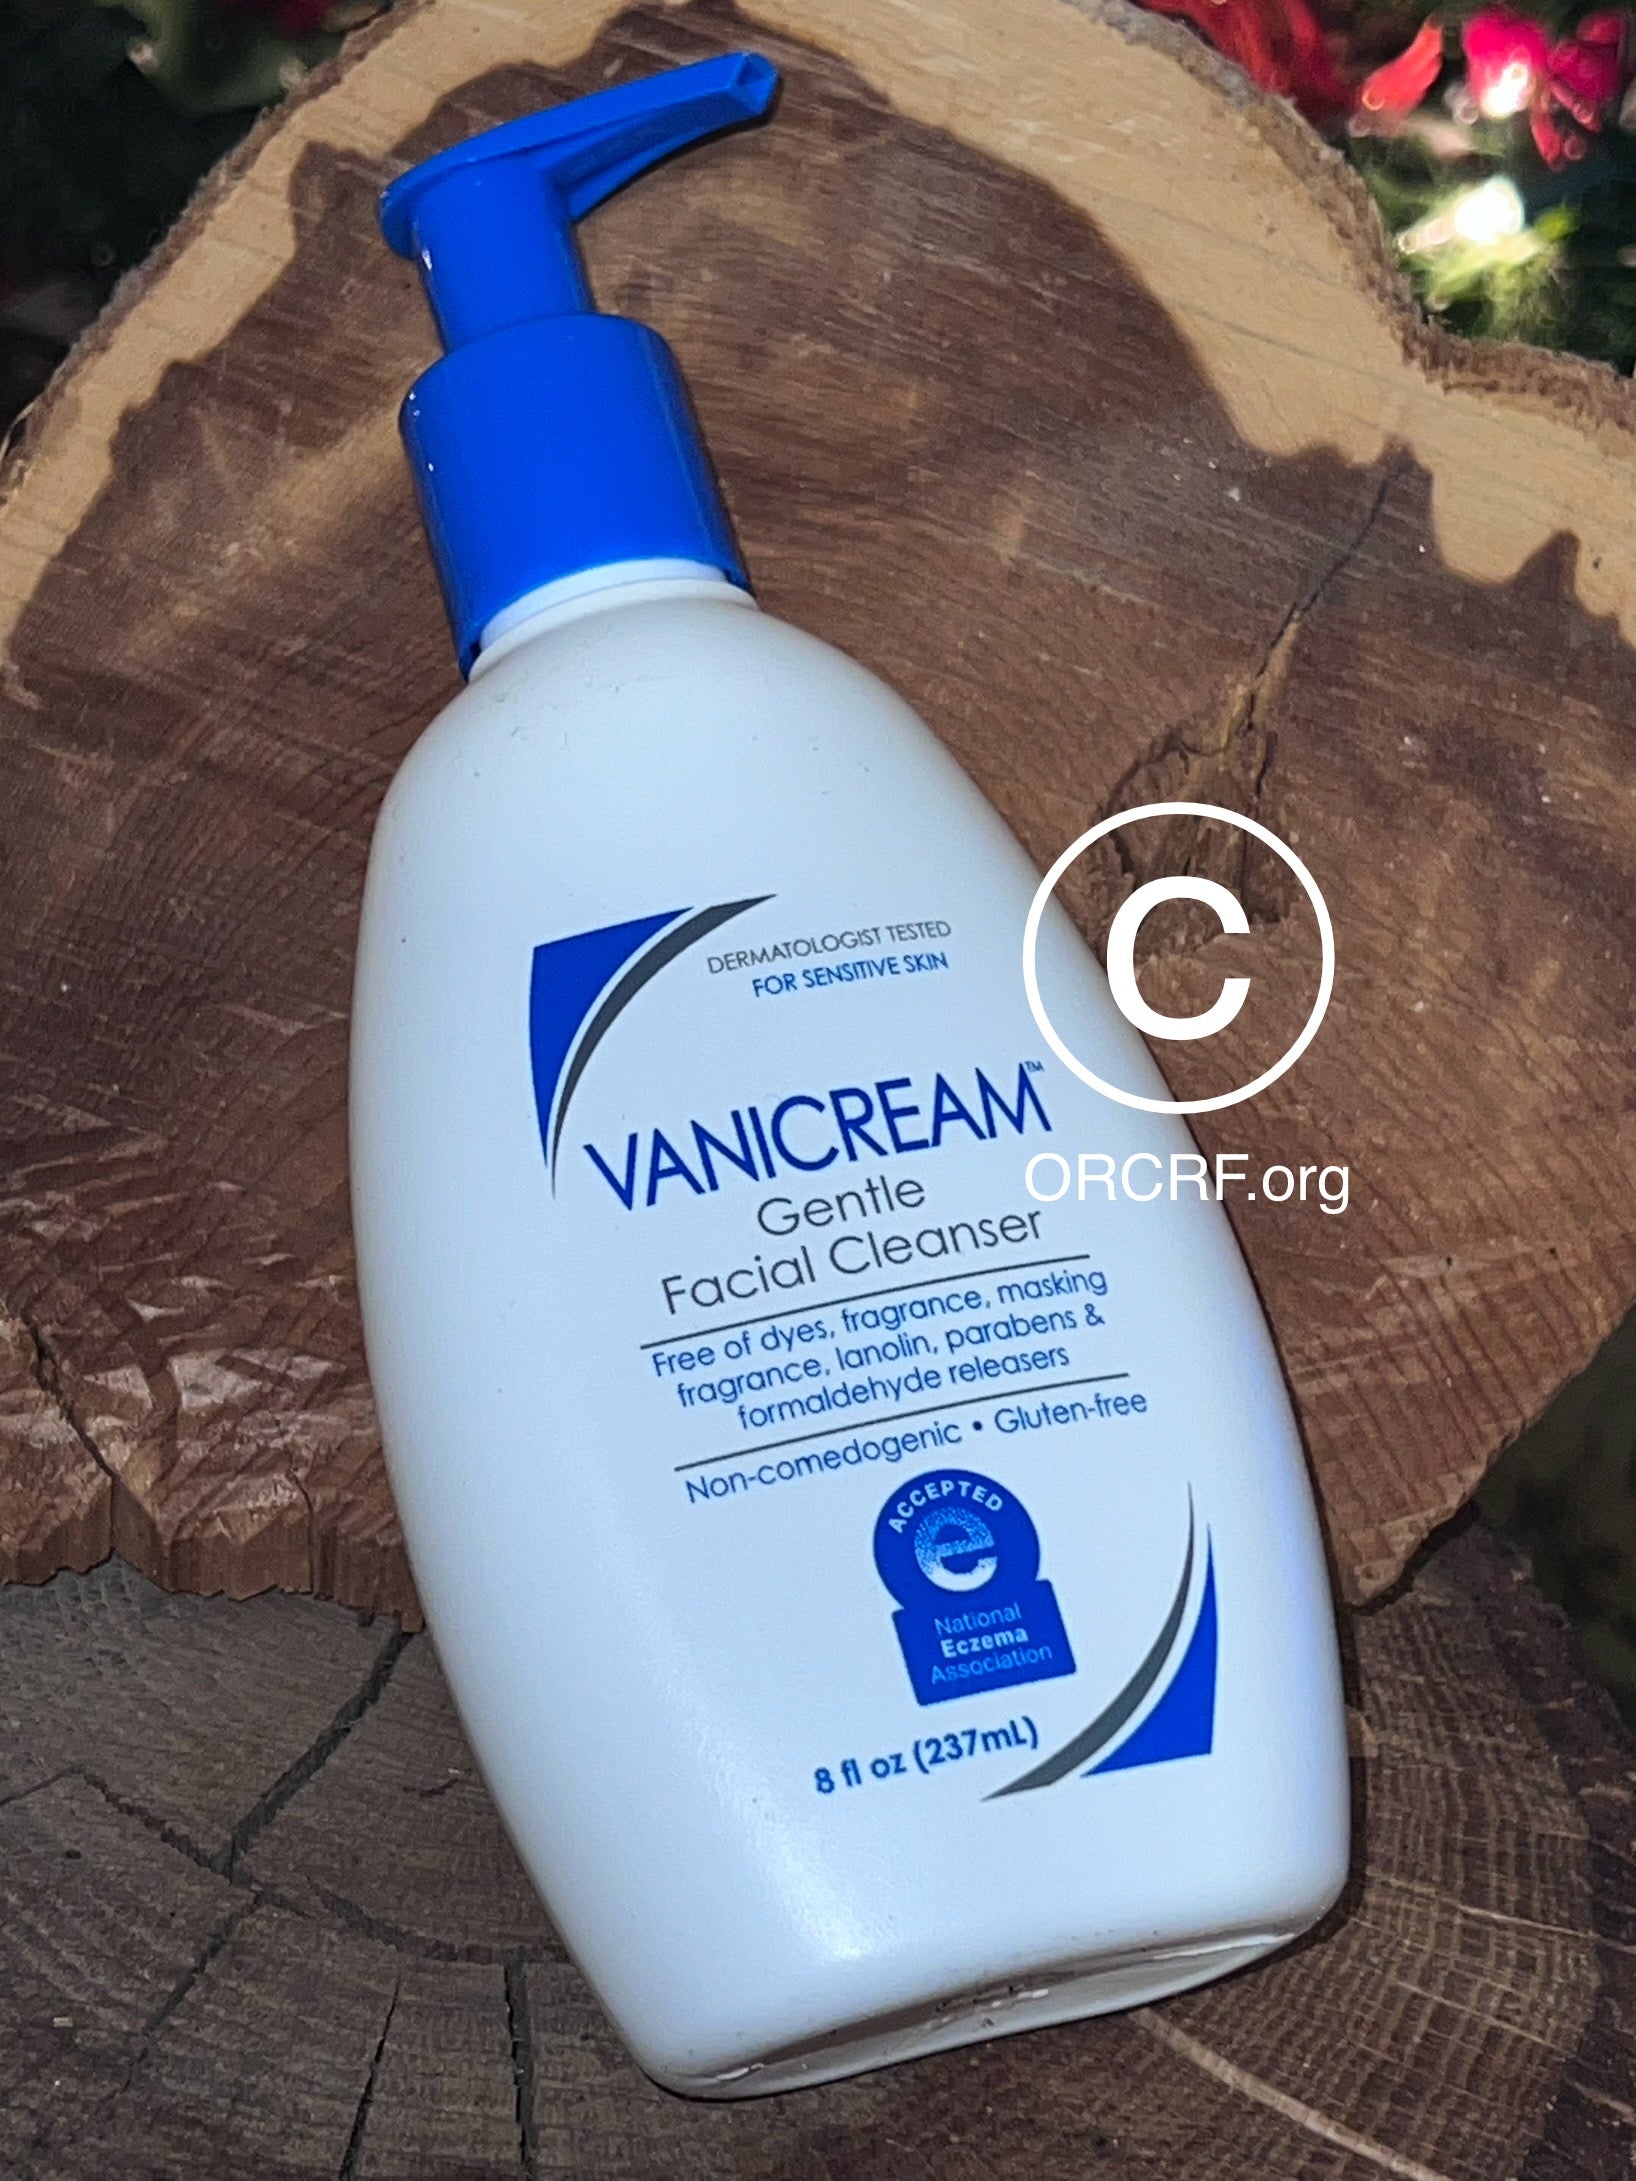 Vanicream GENTLE FACIAL CLEANSER with PUMP DISPENSER for SENSITIVE SKIN 8 fl oz Formulated Without Common Irritants for Those with Sensitive Skin Supporting ORCRF.org